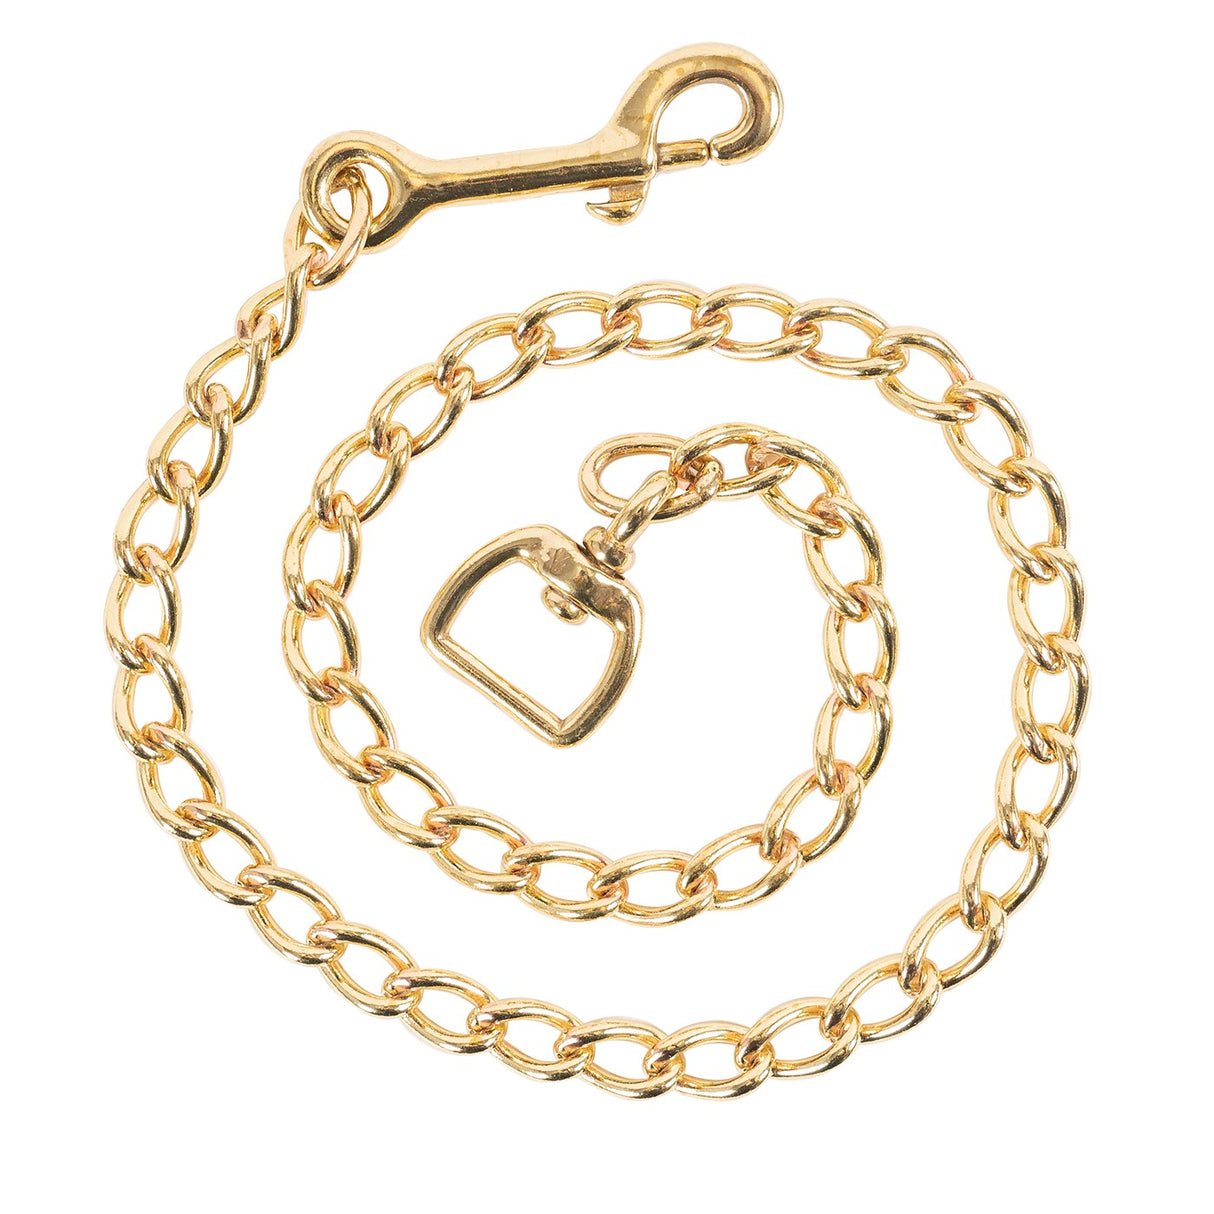 Shedrow Solid Brass Chain 36 In.